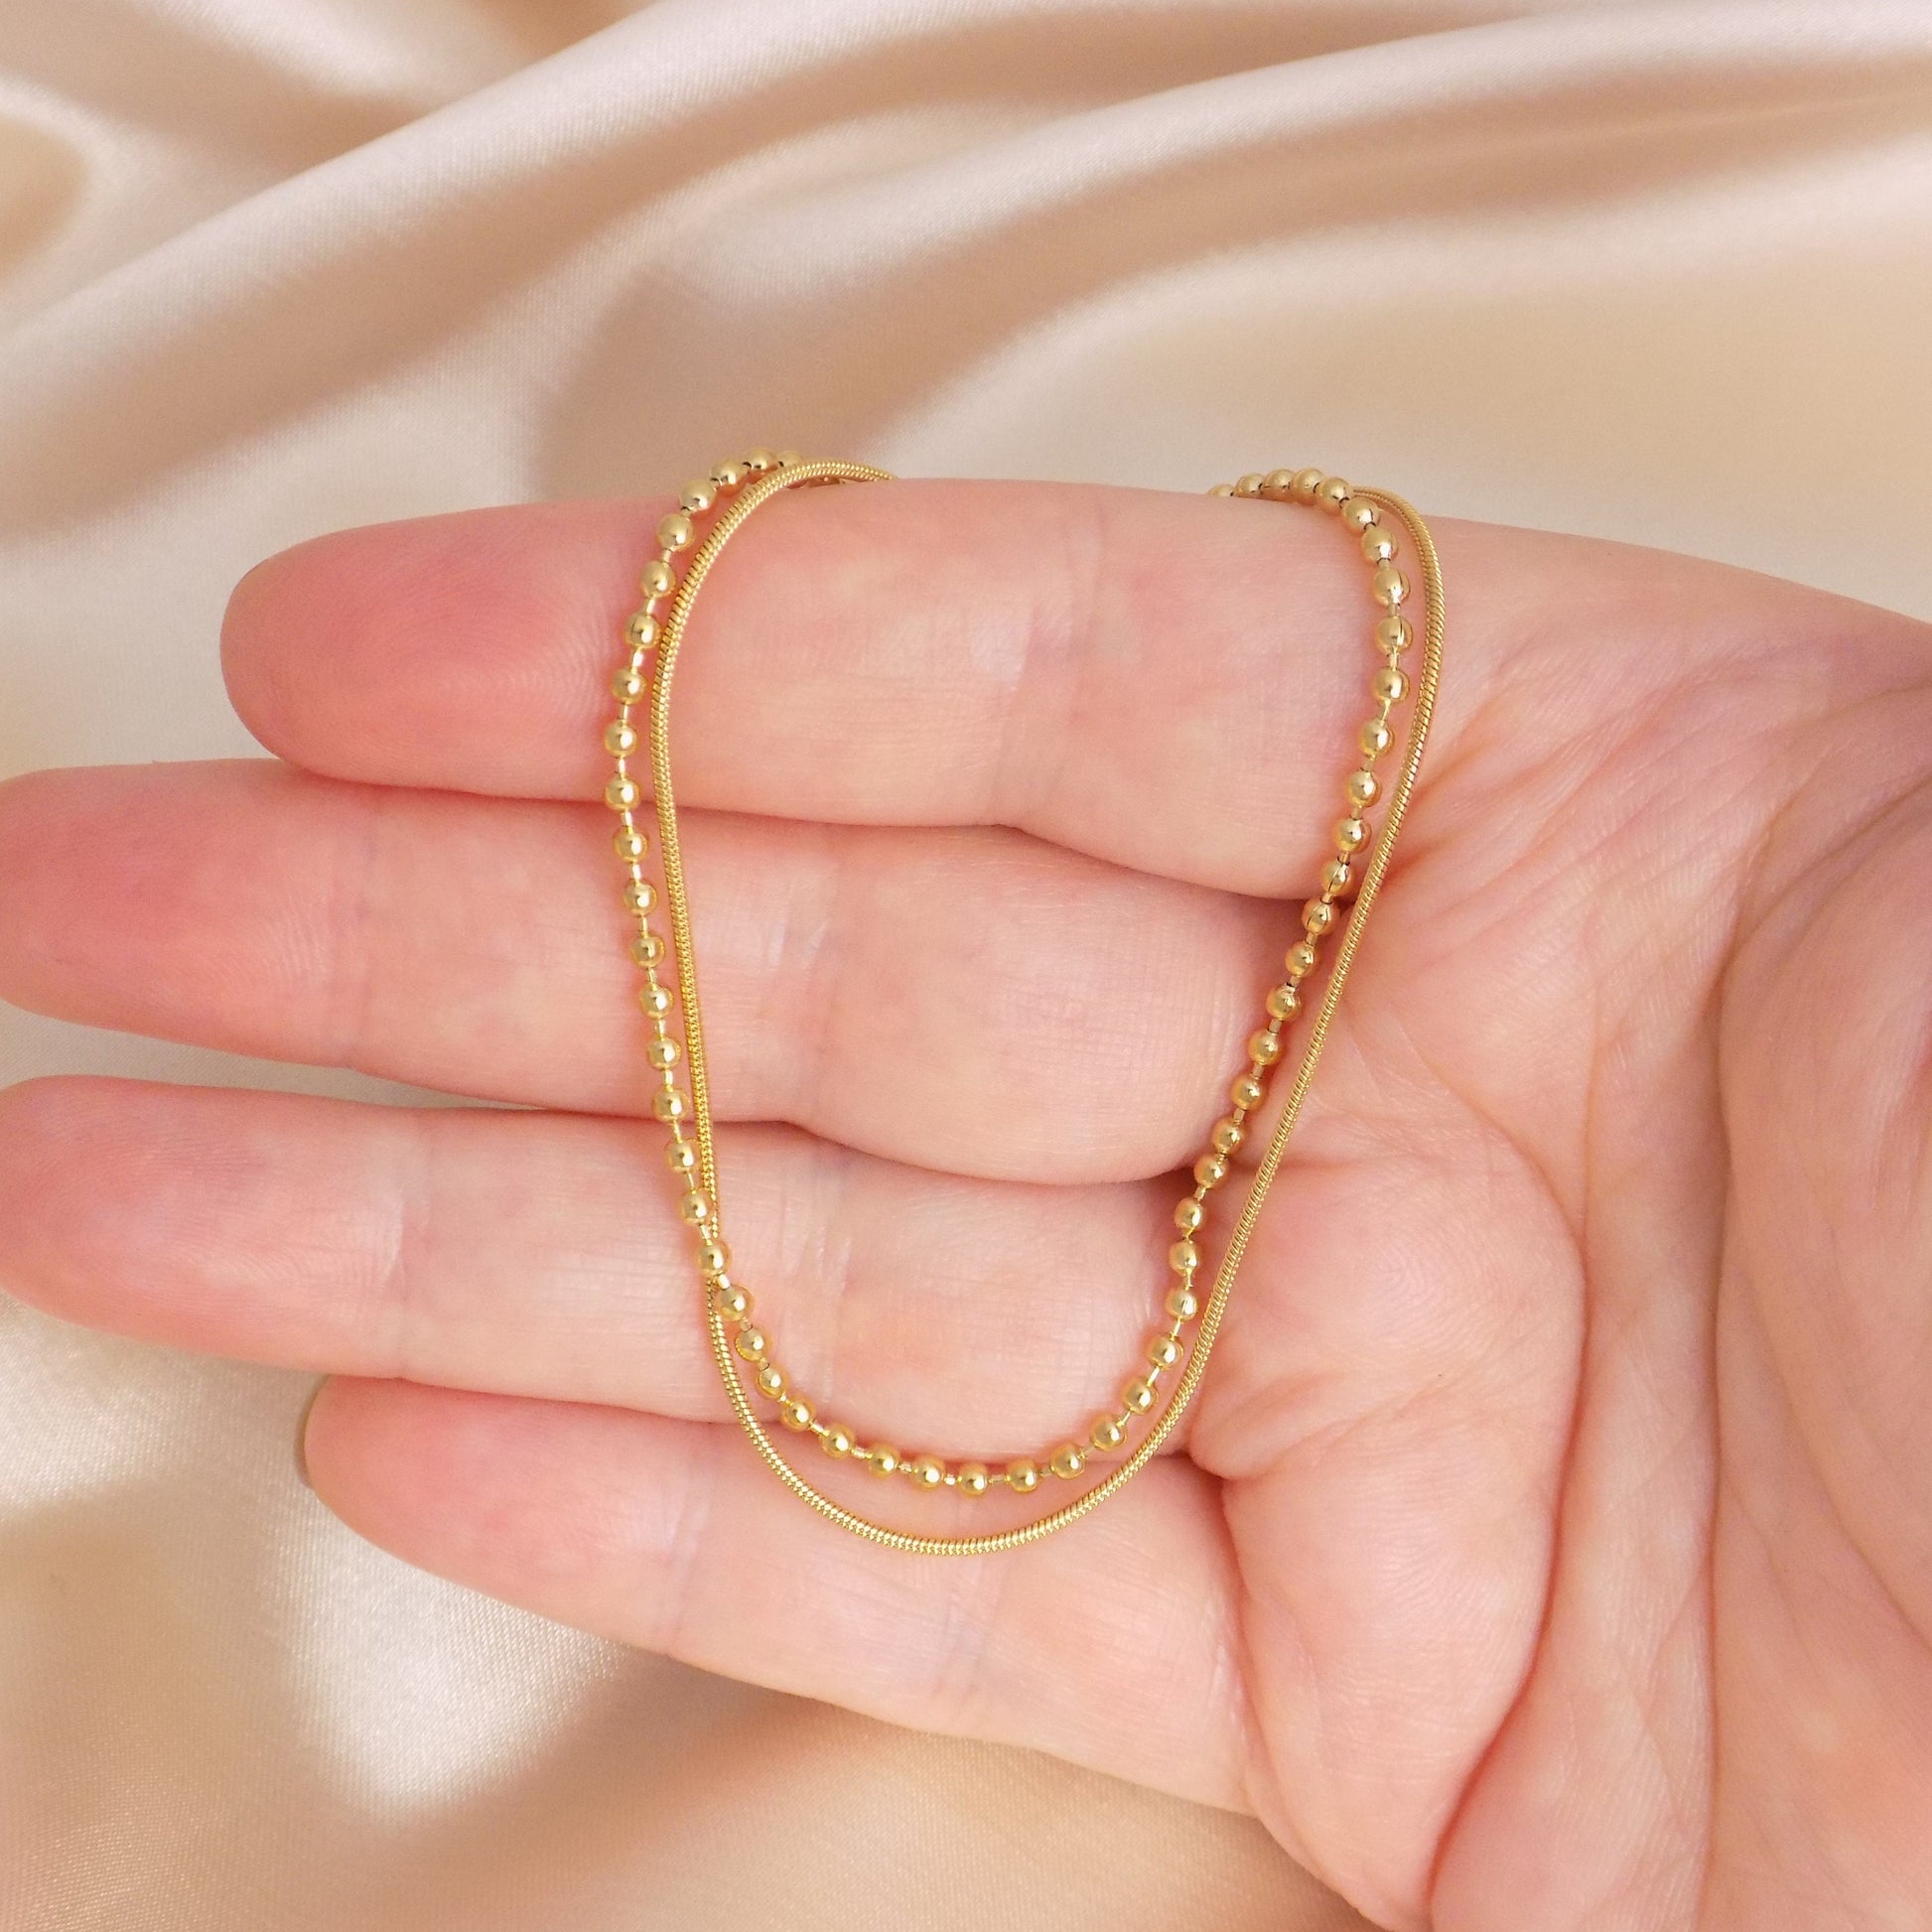 18K Gold Beaded Double Strand Bracelet Adjustable Stainless Steel, Delicate Gold Layer, Simple Everyday, M7-125